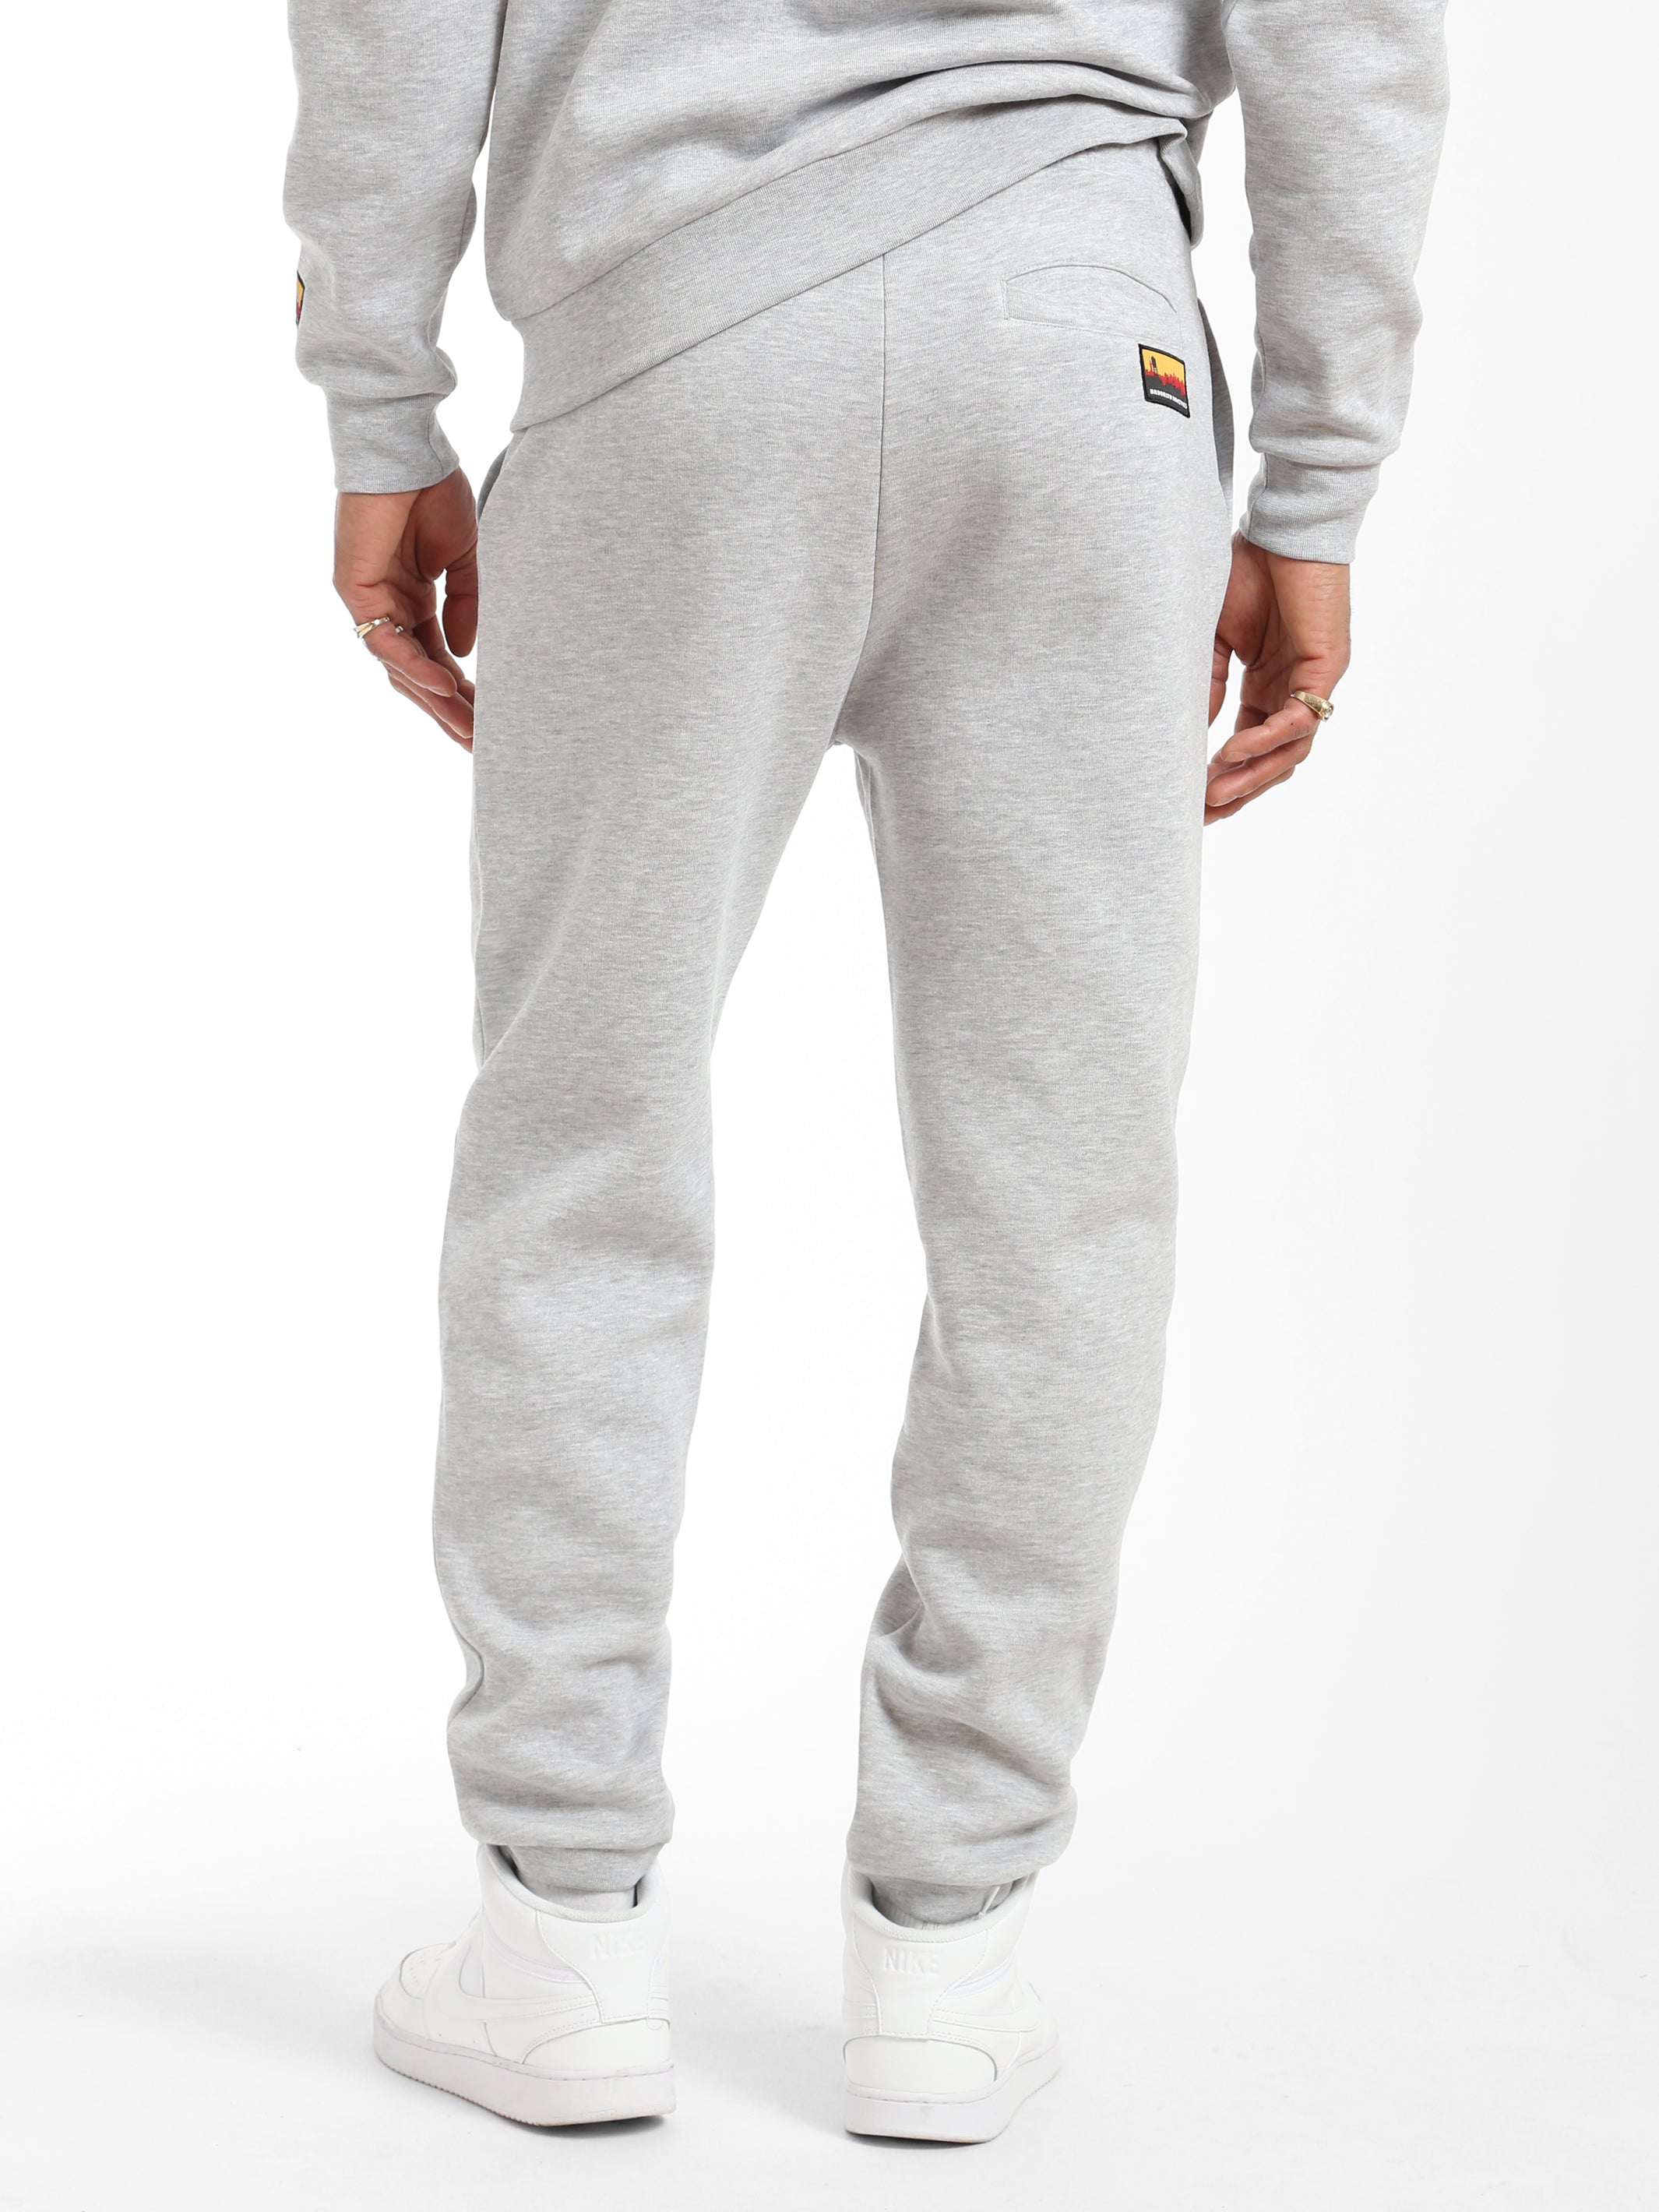 Men's Straight Sweatpants  Men's Up to 50% Off Select Styles